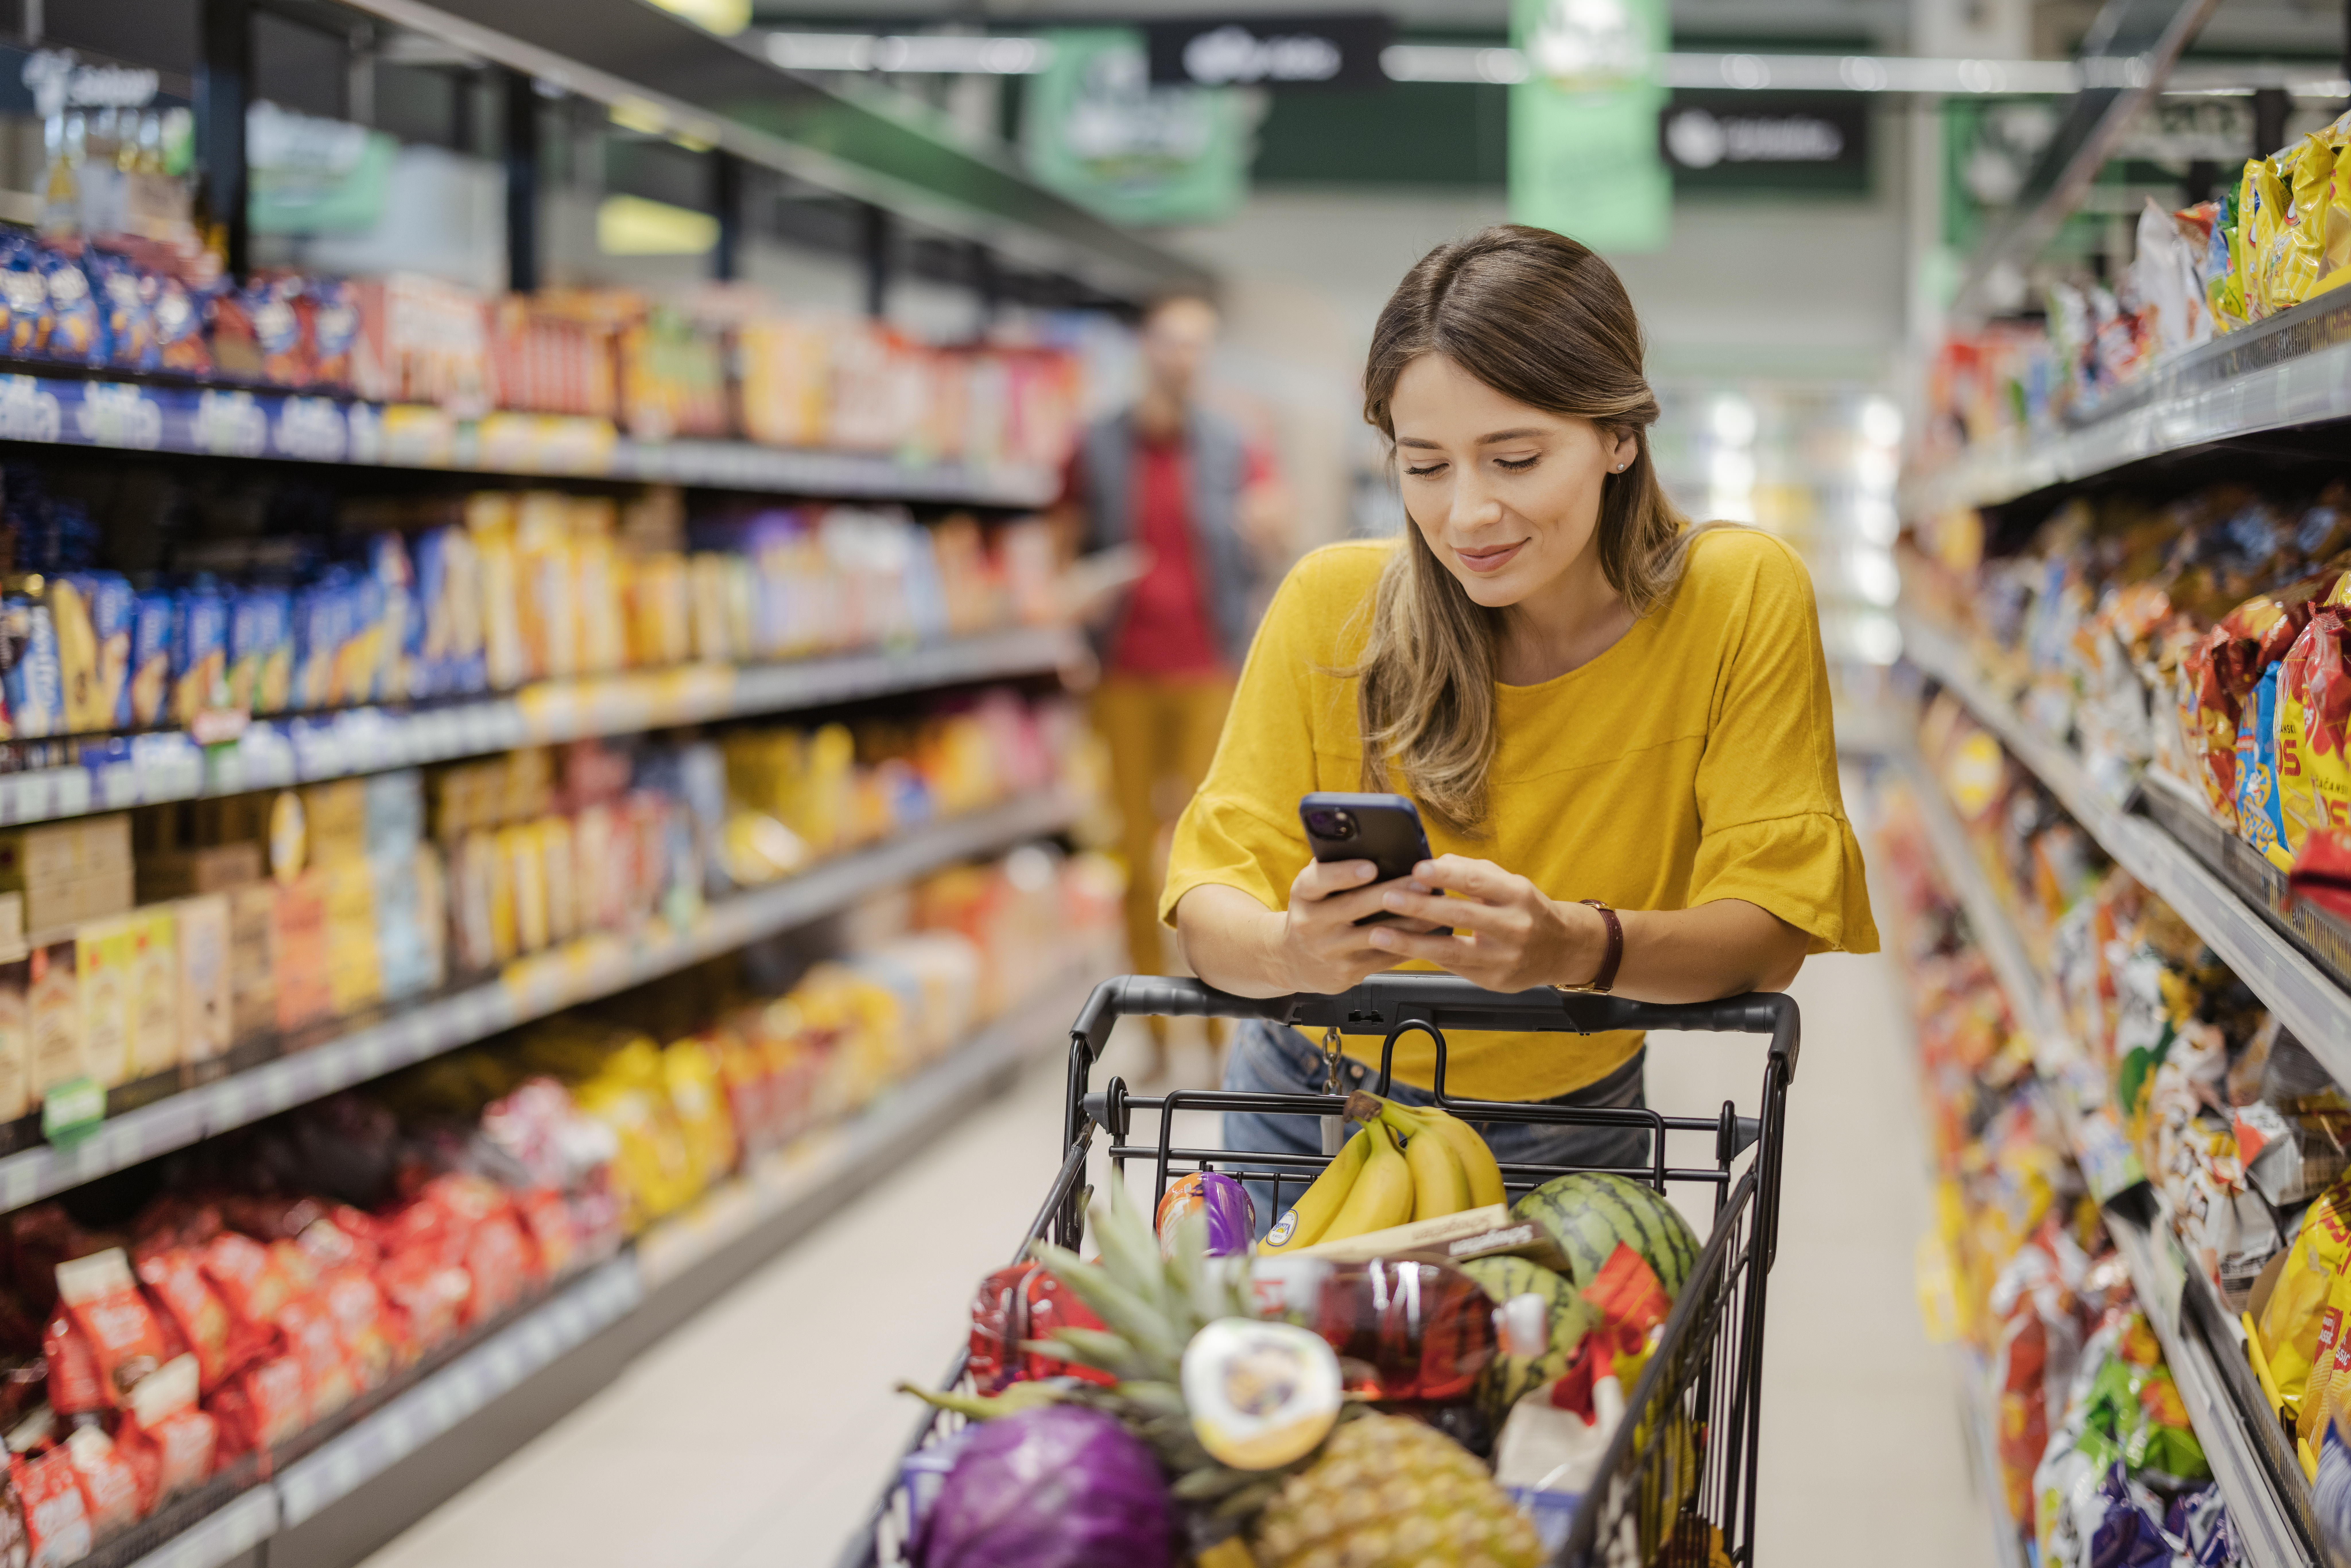 Purchasing Goods with Smartphone at Grocery Store